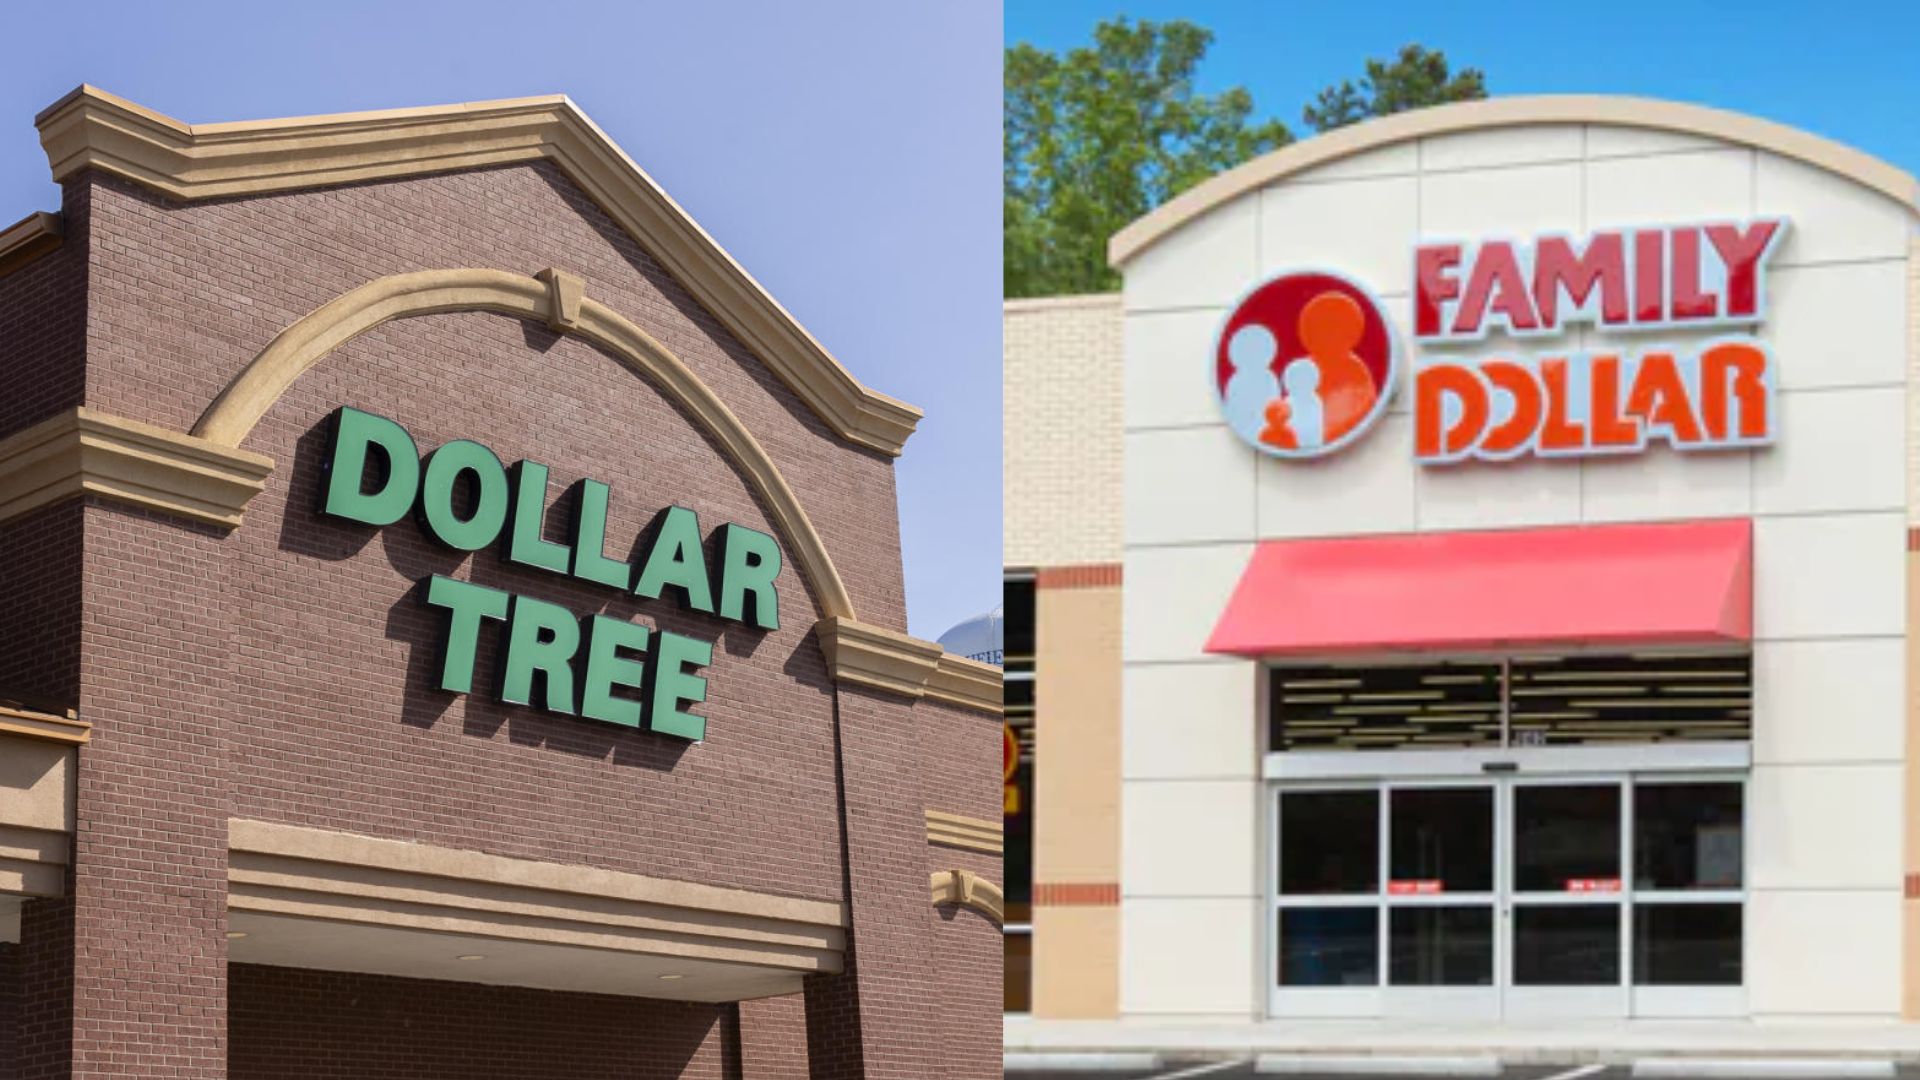 Dollar Tree is considering selling its Family Dollar brand